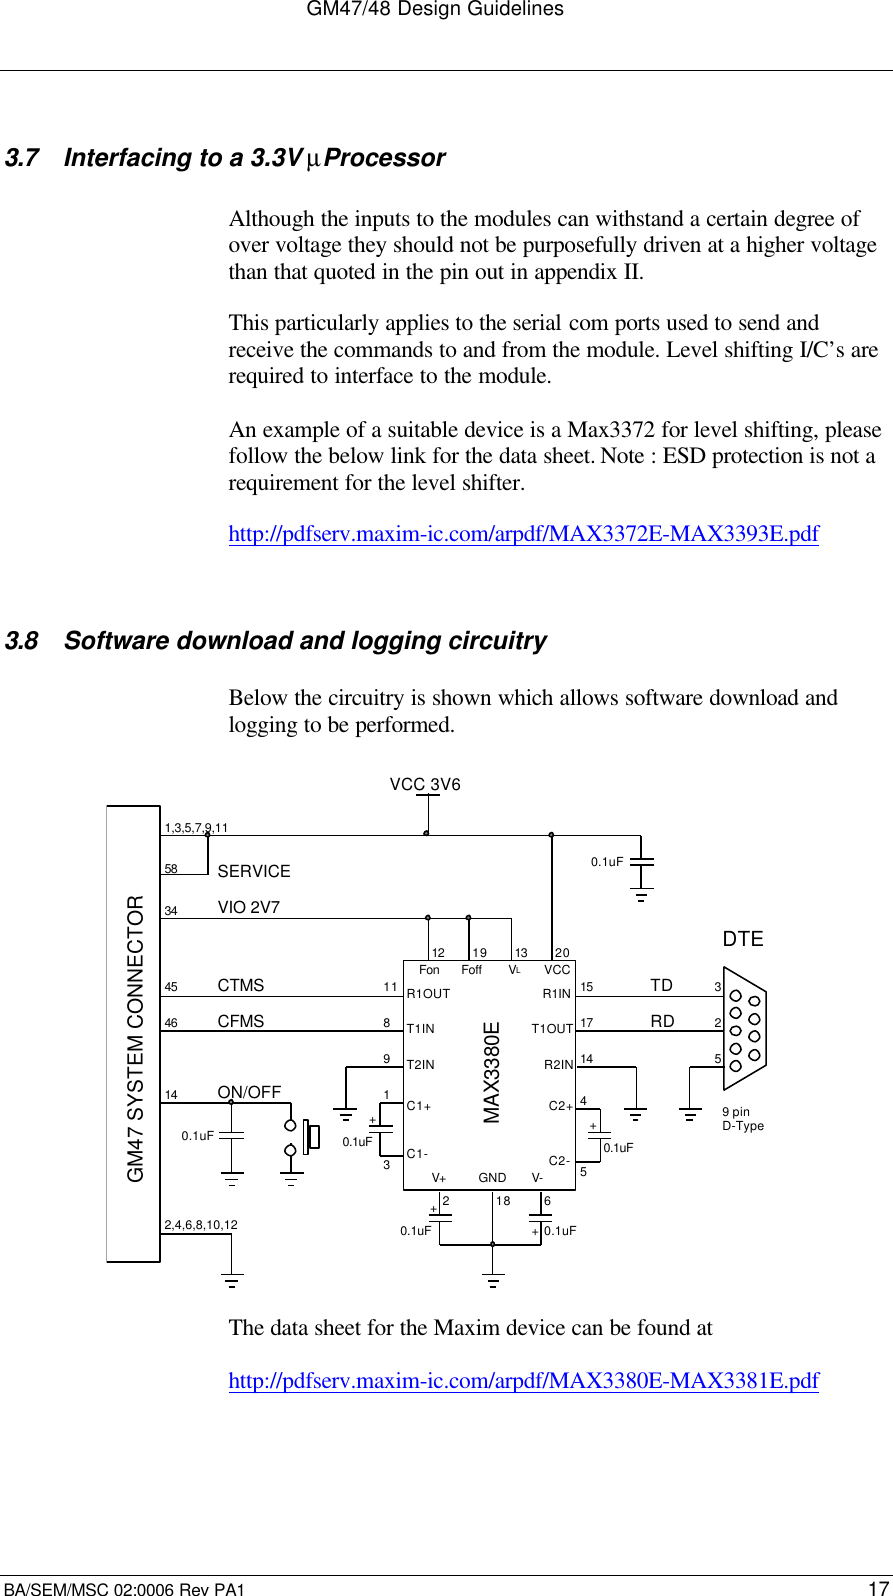 GM47/48 Design GuidelinesBA/SEM/MSC 02:0006 Rev PA1 173.7 Interfacing to a 3.3V µProcessorAlthough the inputs to the modules can withstand a certain degree ofover voltage they should not be purposefully driven at a higher voltagethan that quoted in the pin out in appendix II.This particularly applies to the serial com ports used to send andreceive the commands to and from the module. Level shifting I/C’s arerequired to interface to the module.An example of a suitable device is a Max3372 for level shifting, pleasefollow the below link for the data sheet. Note : ESD protection is not arequirement for the level shifter.http://pdfserv.maxim-ic.com/arpdf/MAX3372E-MAX3393E.pdf3.8 Software download and logging circuitryBelow the circuitry is shown which allows software download andlogging to be performed.VCC 3V6MAX3380EVIO 2V7CTMSCFMSVCC0.1uF1,3,5,7,9,112,4,6,8,10,1234584546SERVICE140.1uFON/OFF325TDRDDTE9 pinD-Type0.1uF0.1uF0.1uF0.1uFVLFonFoffR1OUTR1INT1INT1OUTGNDV+V-++++C1+C1-C2+C2-1519 13 201751148123218 61GM47 SYSTEM CONNECTOR9T2INR2IN14The data sheet for the Maxim device can be found athttp://pdfserv.maxim-ic.com/arpdf/MAX3380E-MAX3381E.pdf